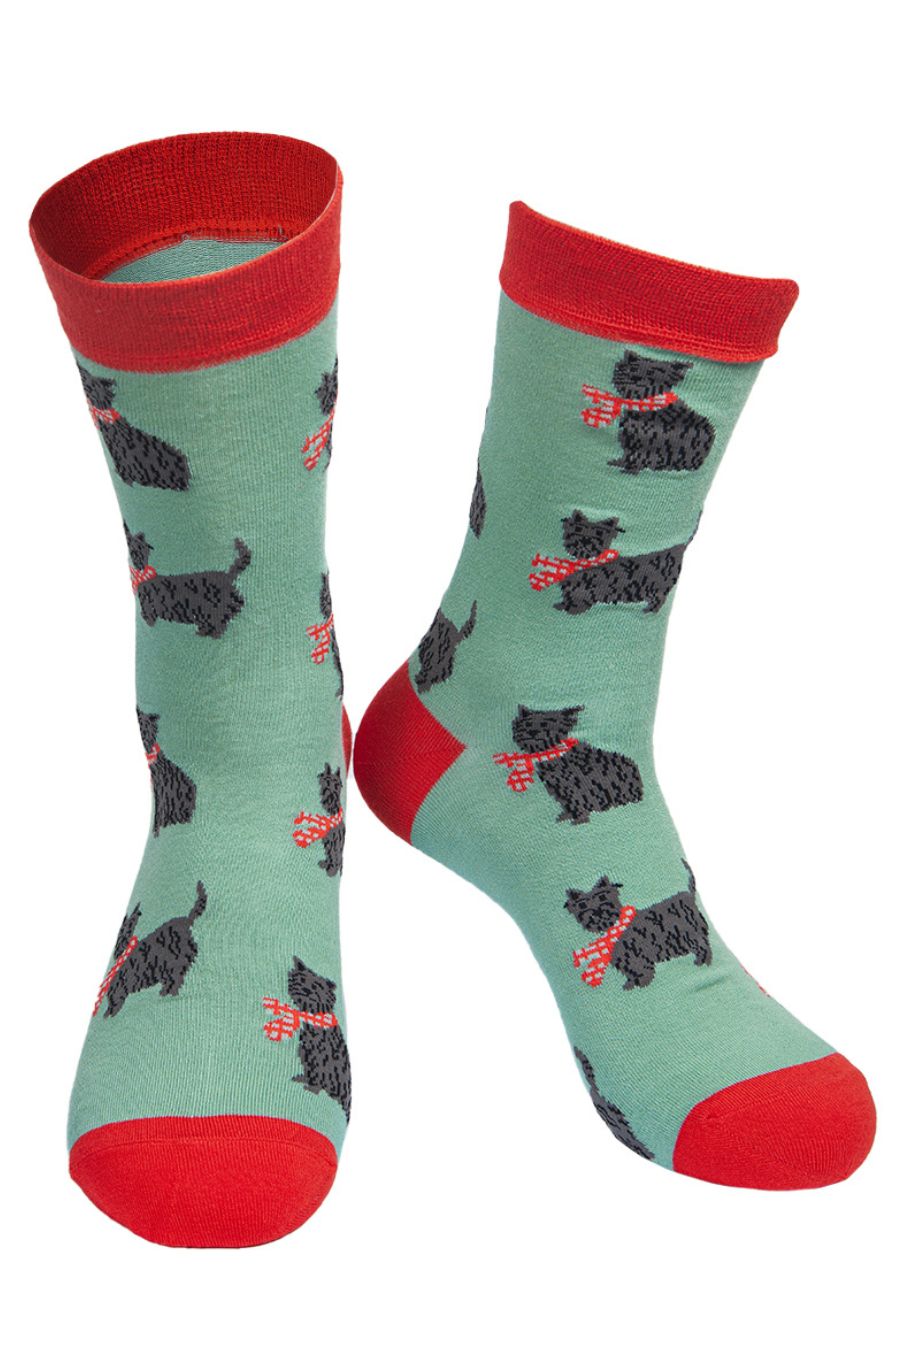 green and red bamboo socks with west highland terriers on them